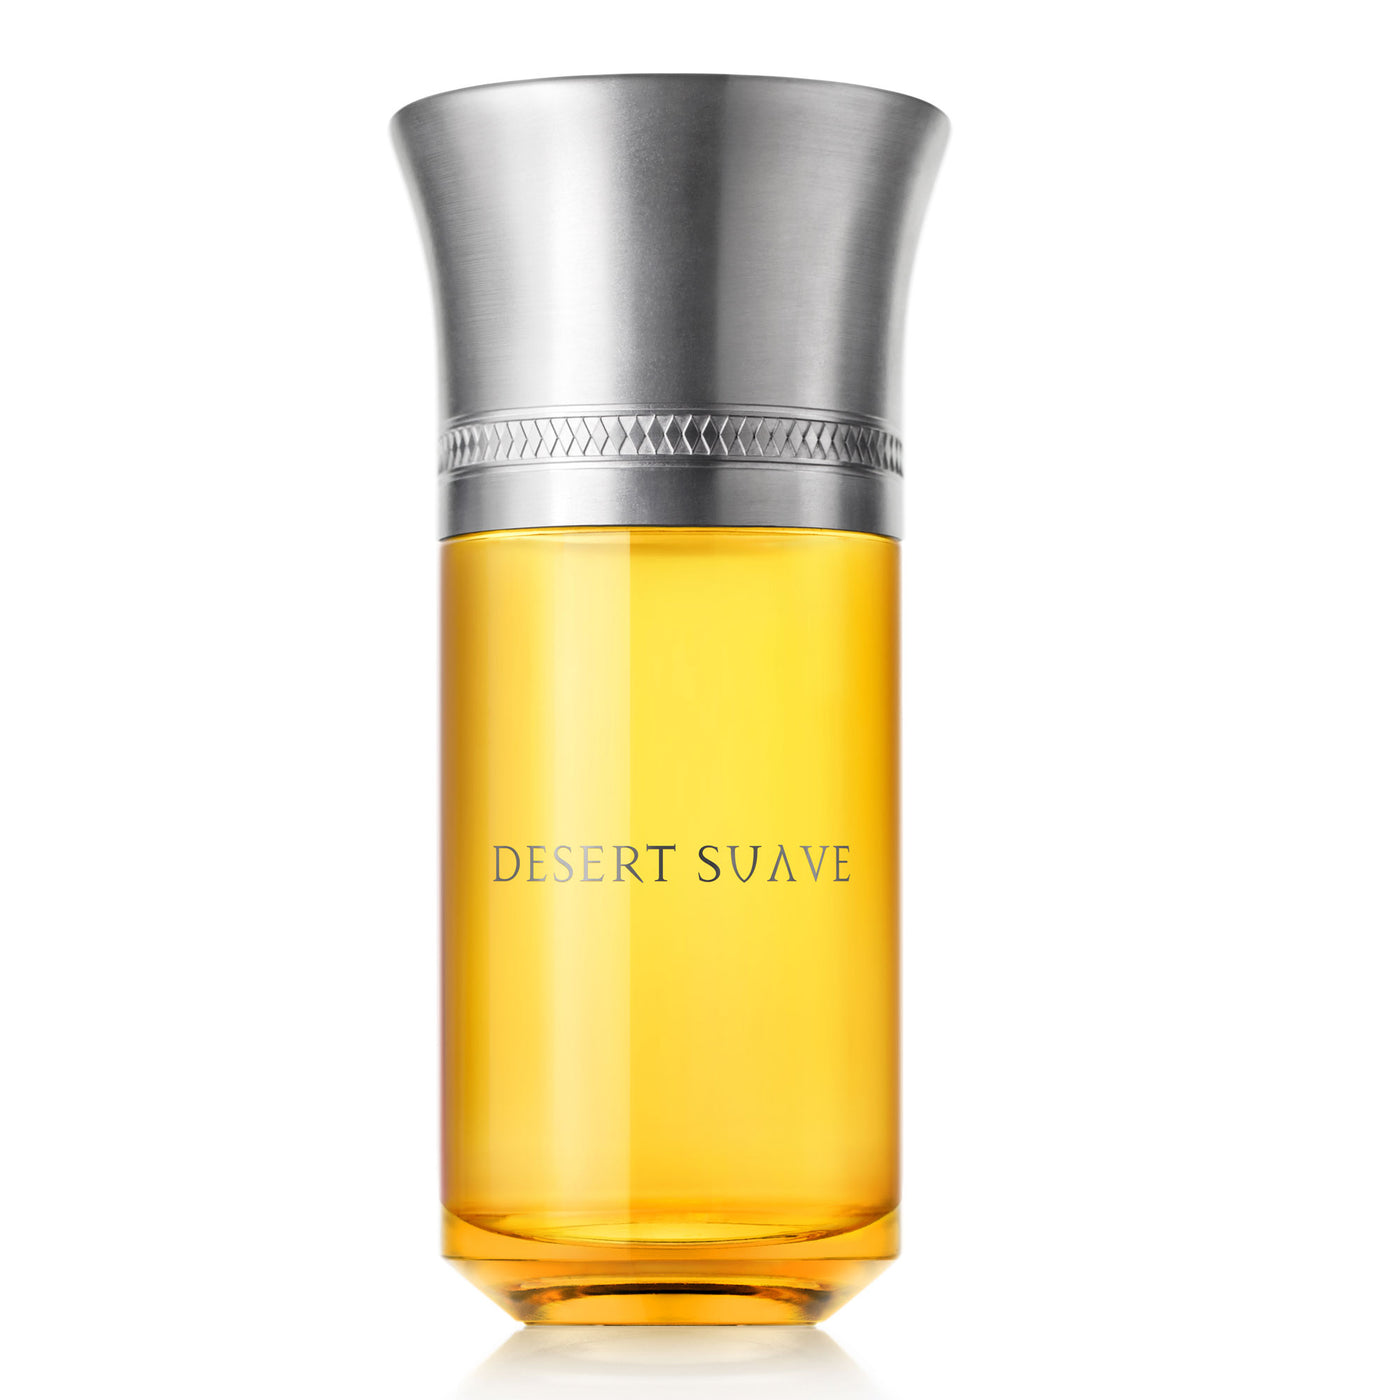 Liquides Imaginaires Desert Suave 50ml - Gharyal by Collectibles 